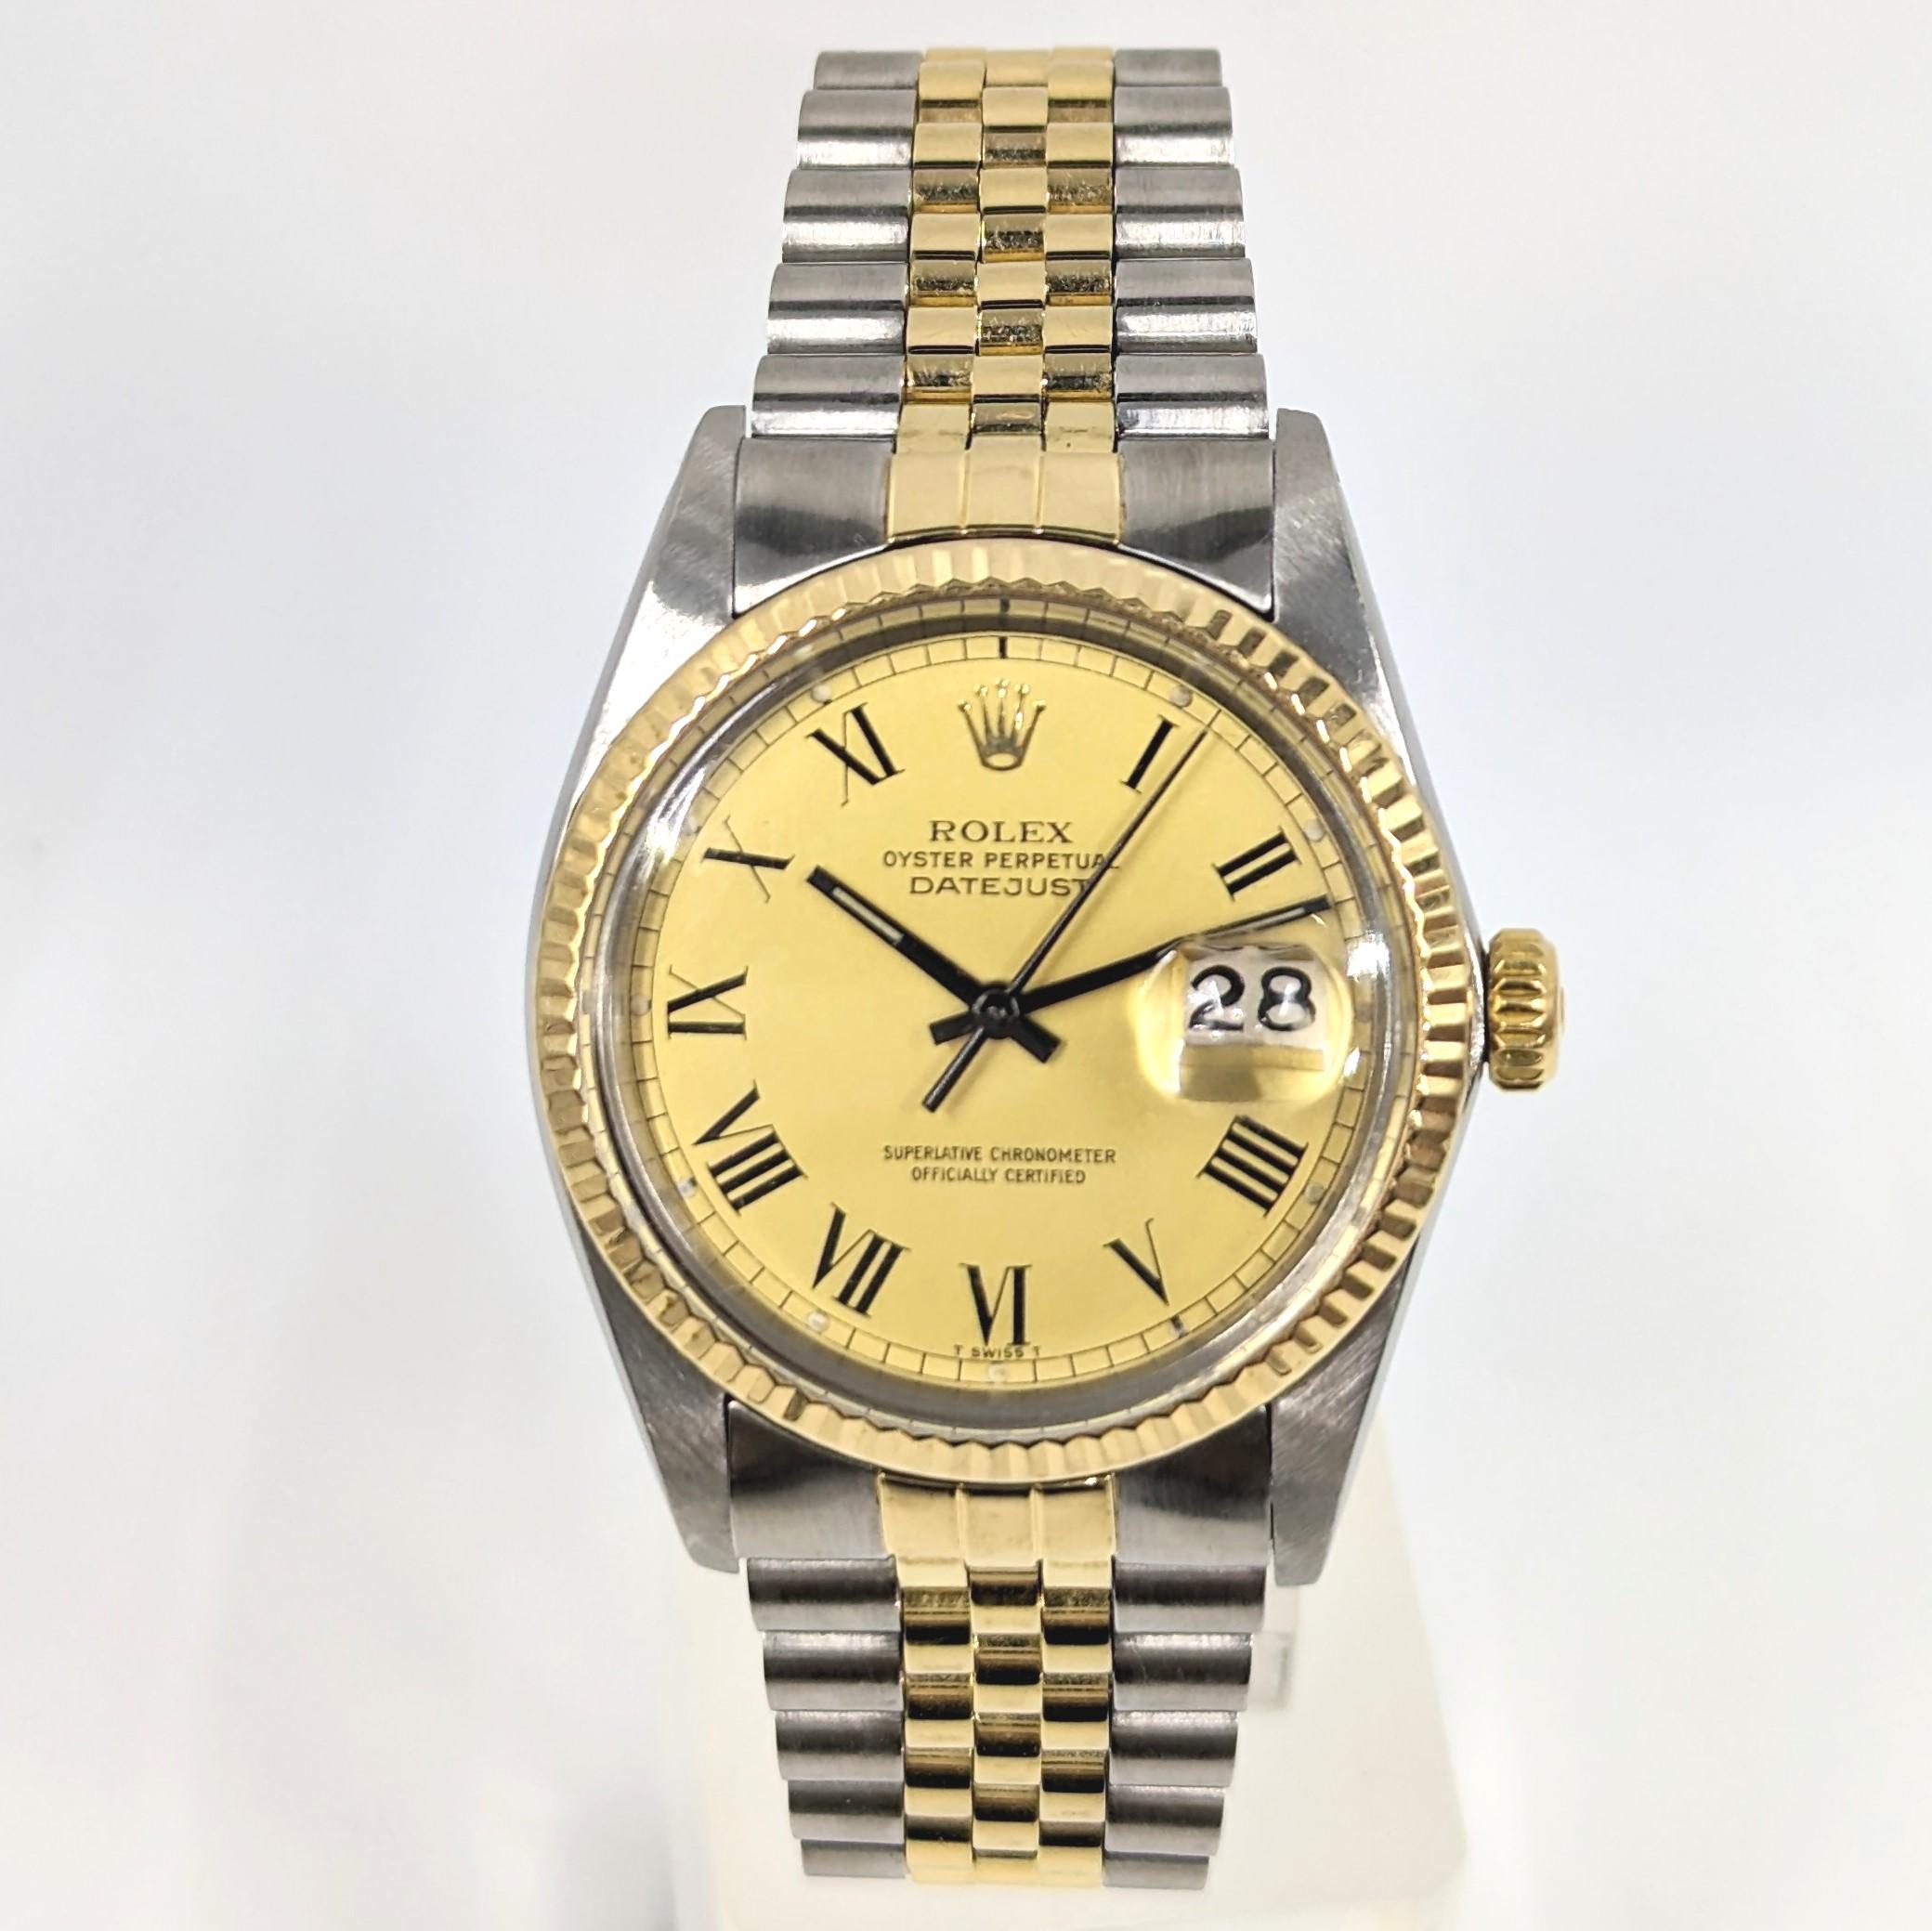 Rolex Oyster Perpetual Datejust 18k/SS YG 2tone Watch Collectible Buckley 16013 en vente 1